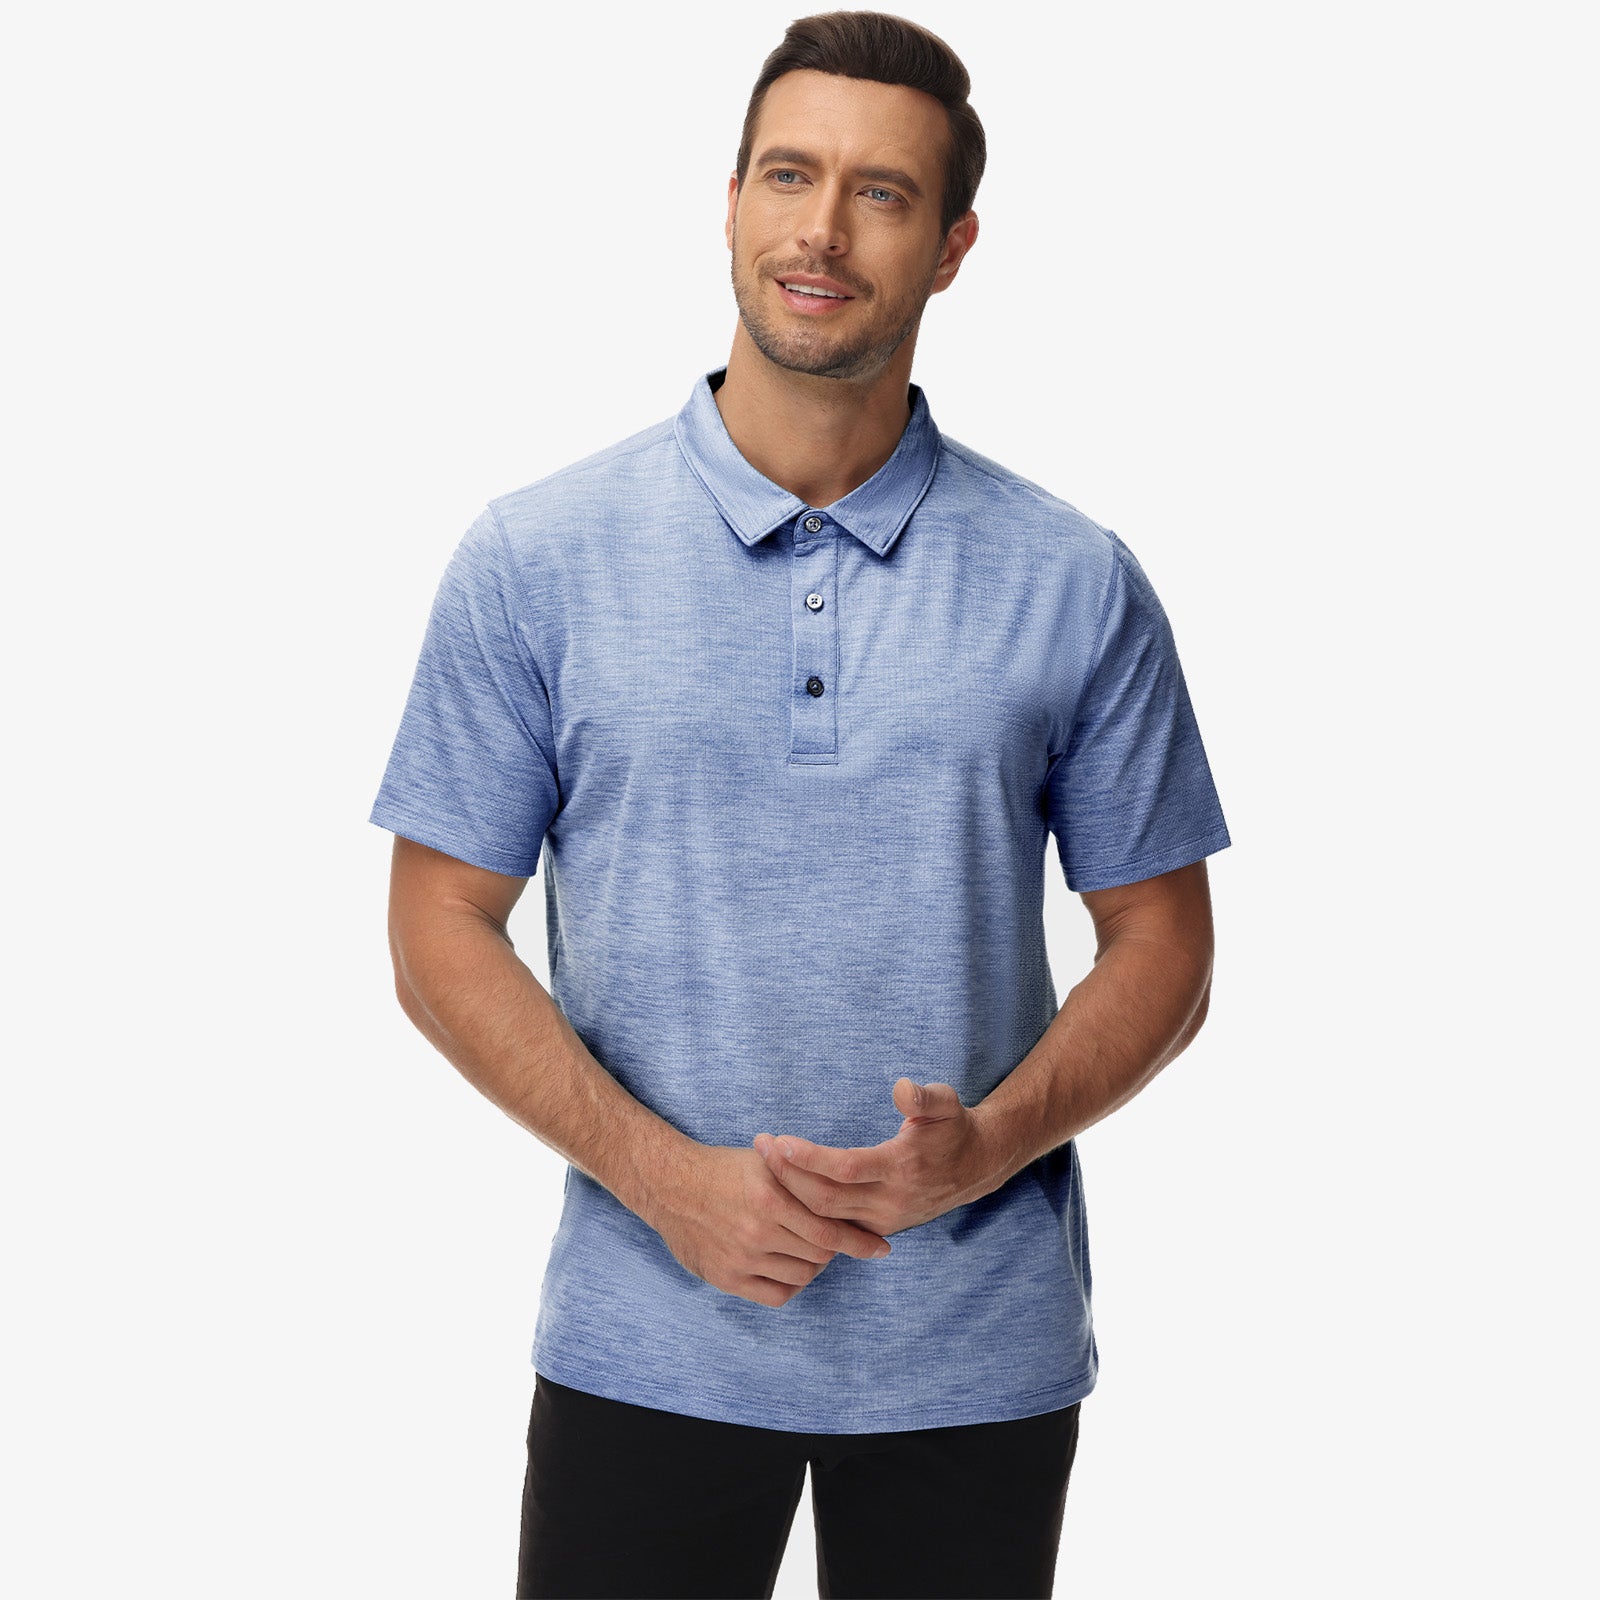 Men's Golf Dry Fit Polo Shirts Athletic Collared Shirt